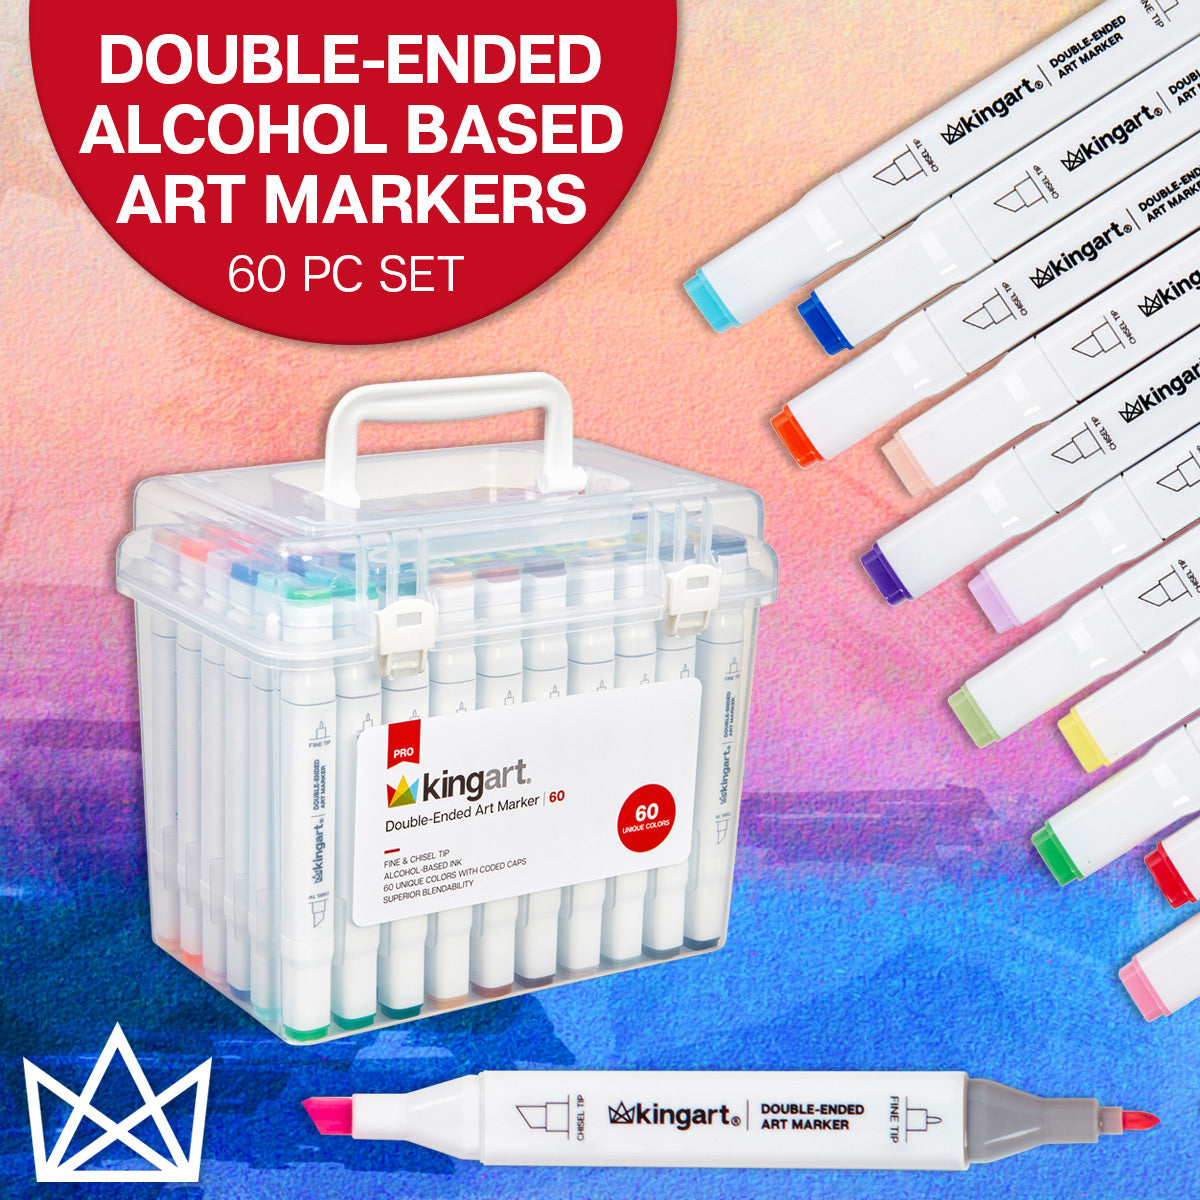  KINGART PRO Double-Ended Art Alcohol Markers, in 24 Portrait  Palette Colors with Both Fine & Chisel Tips and Superior Blendability